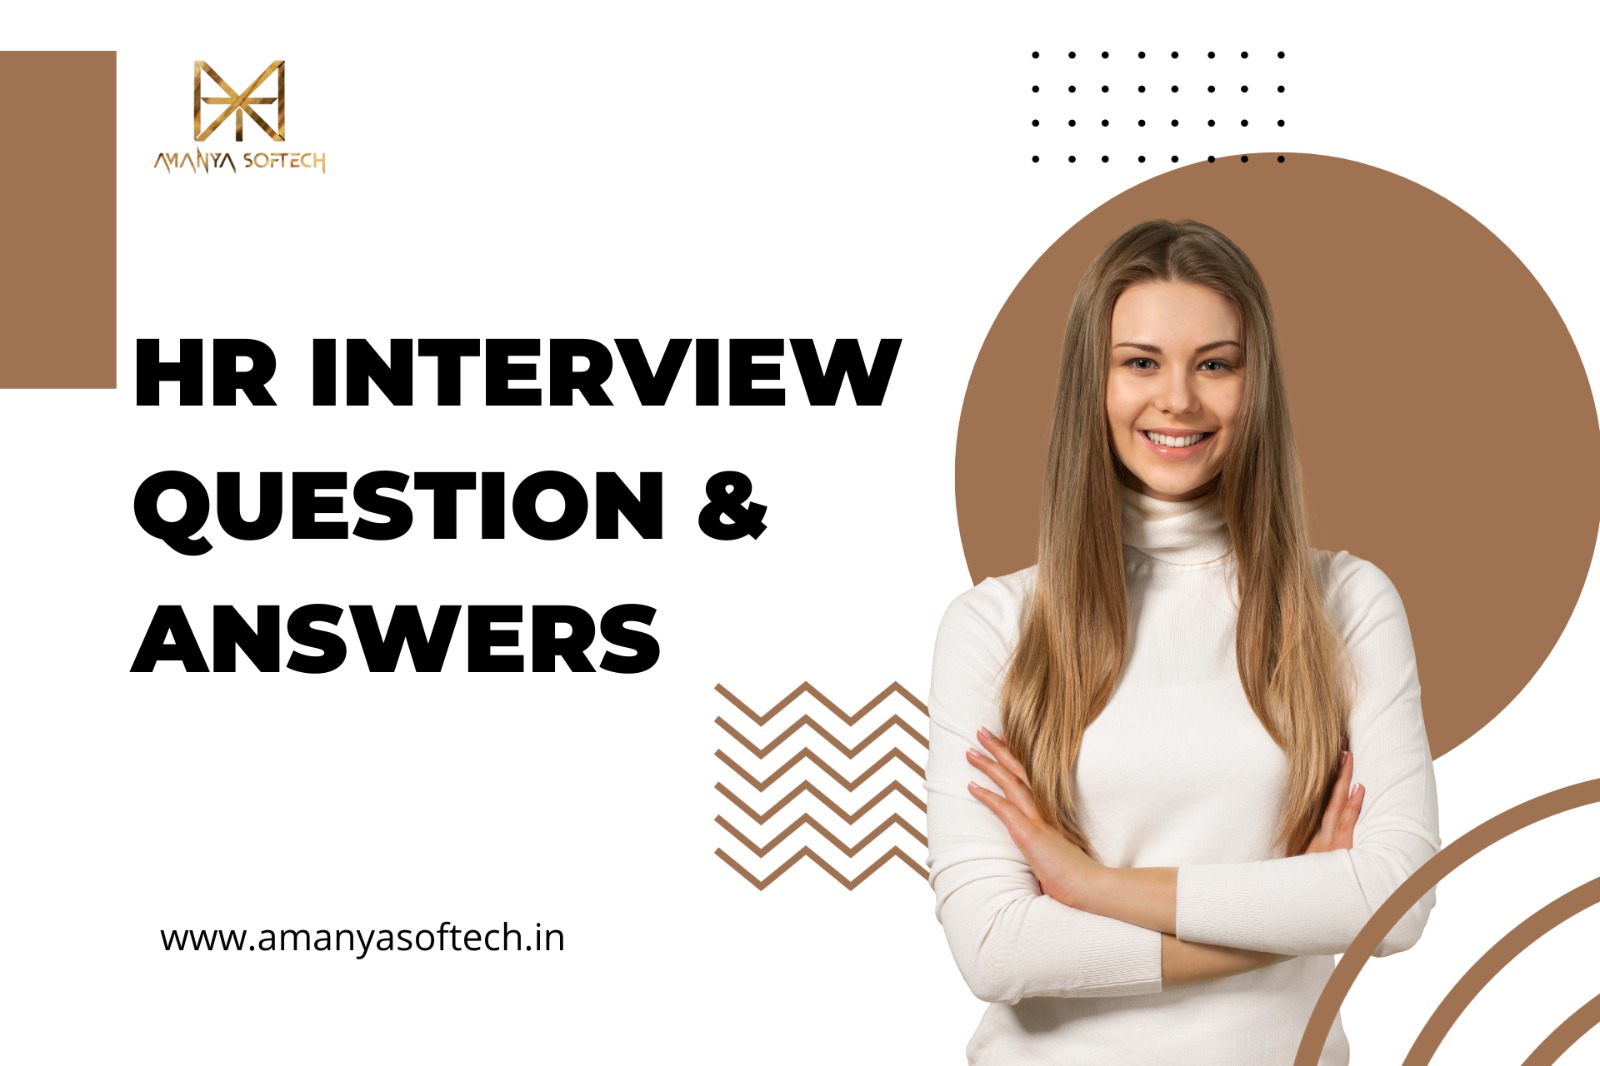 HR Interview Question and Answers